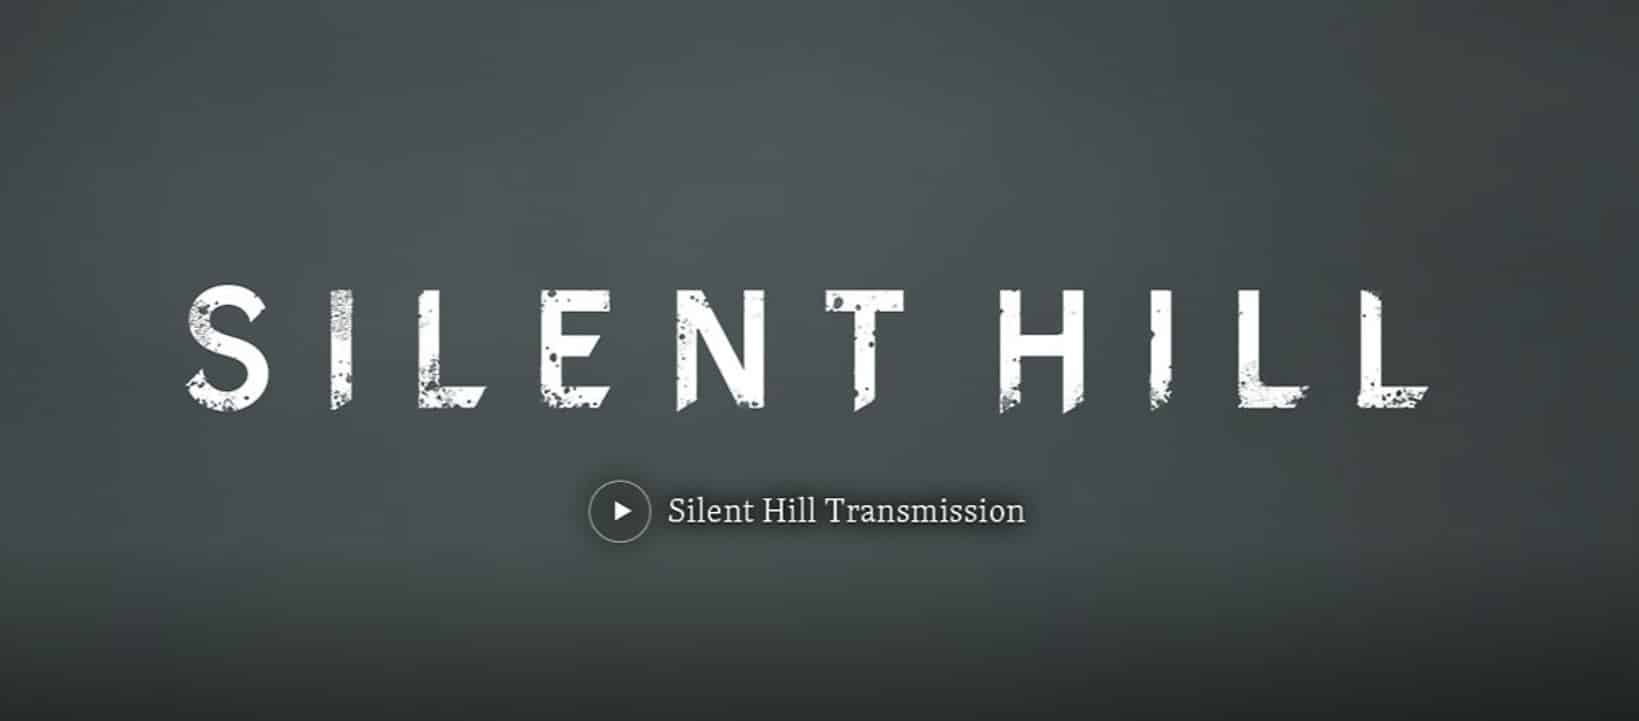 Silent Hill Showcase Details Leaked Thanks to the Transmission Video